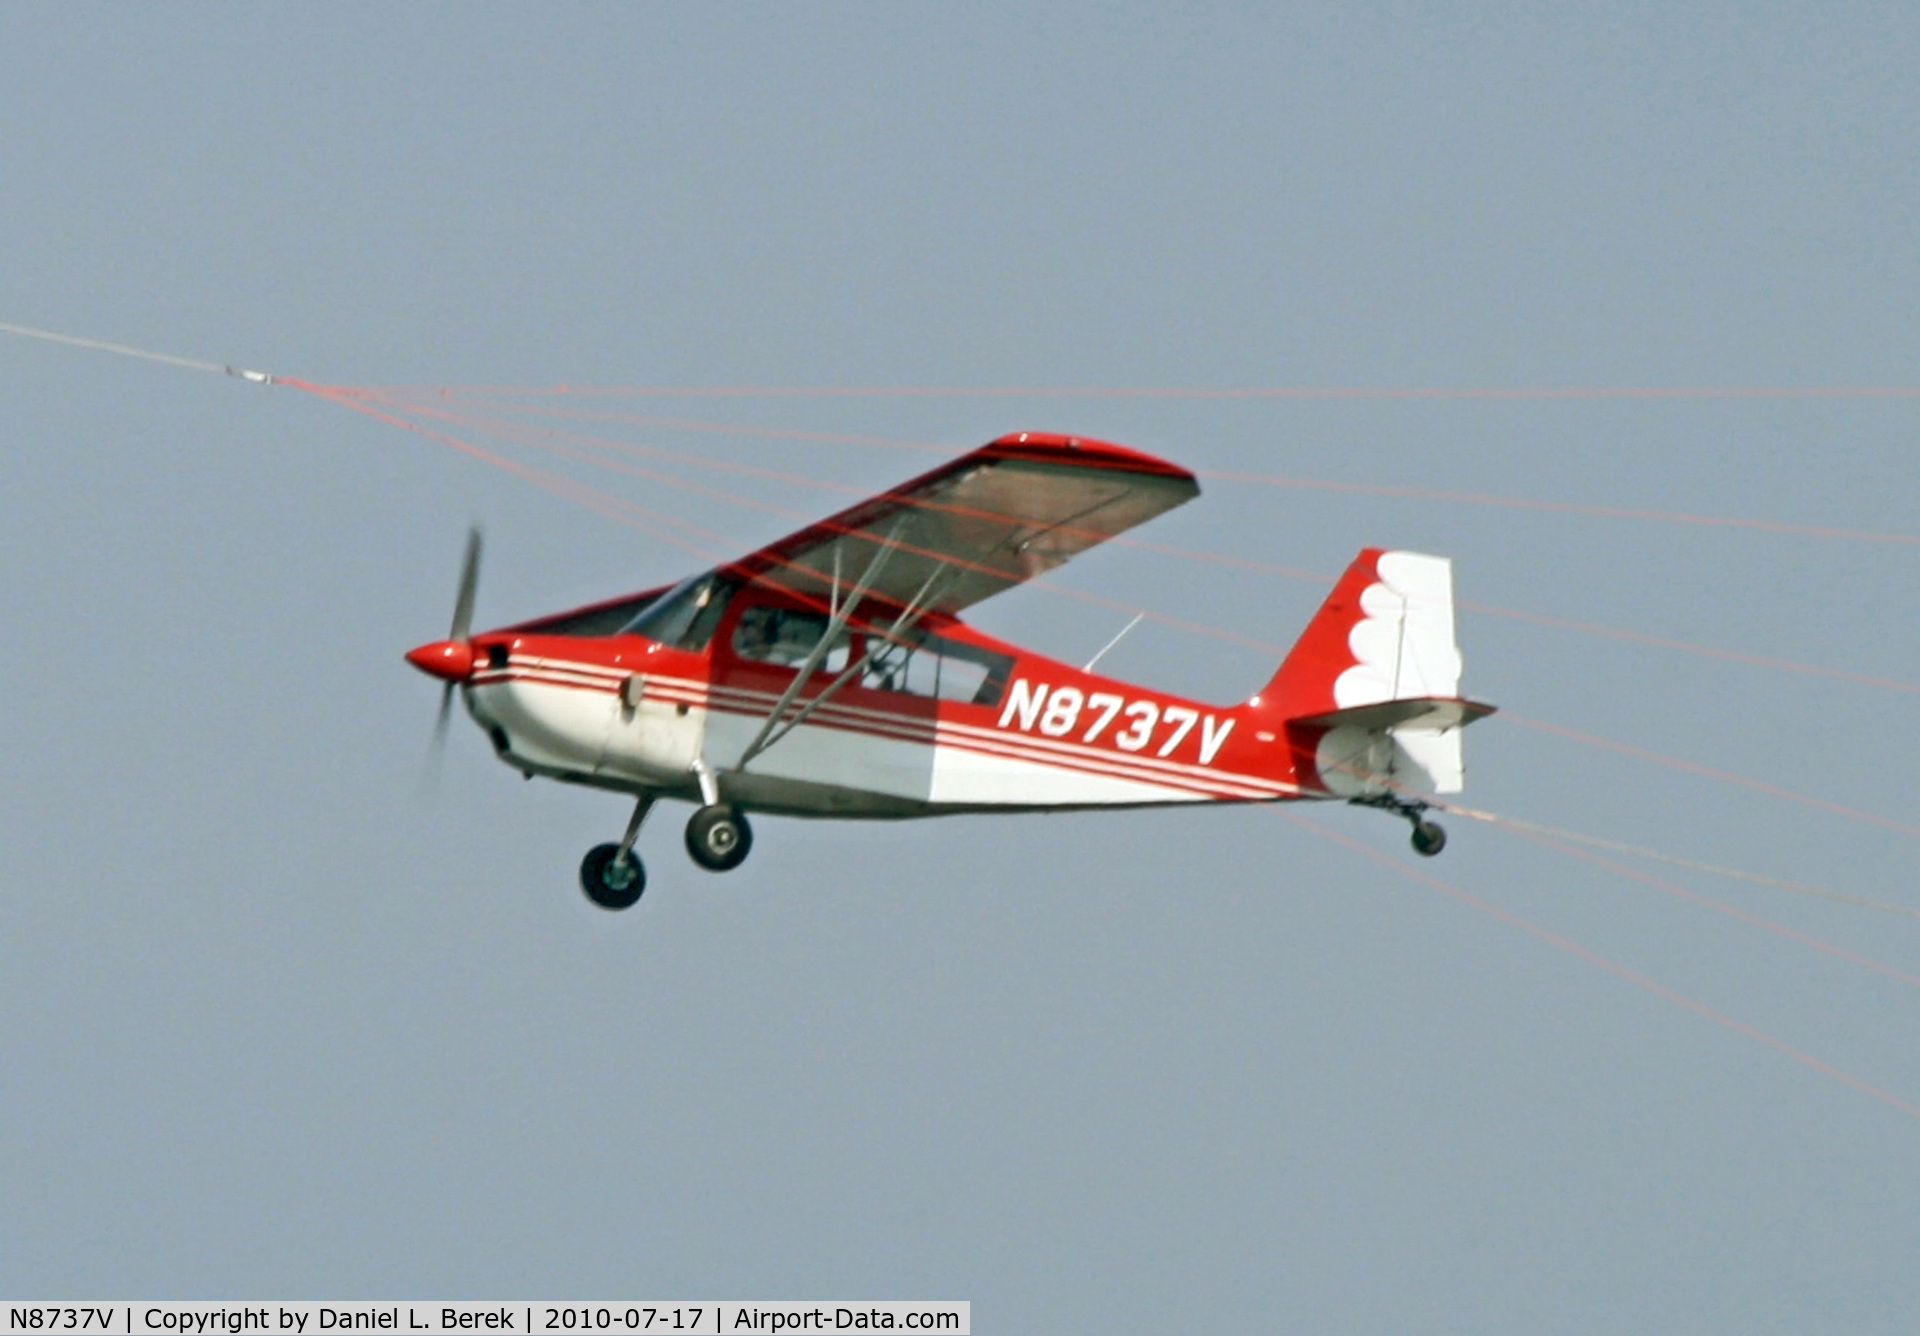 N8737V, 1975 Bellanca 7GCBC C/N 848-75, A Bellanca banner tow plane tries to catch up with another aircraft flying ahead, as seen off the coast of Point Pleasant Beach, NJ.